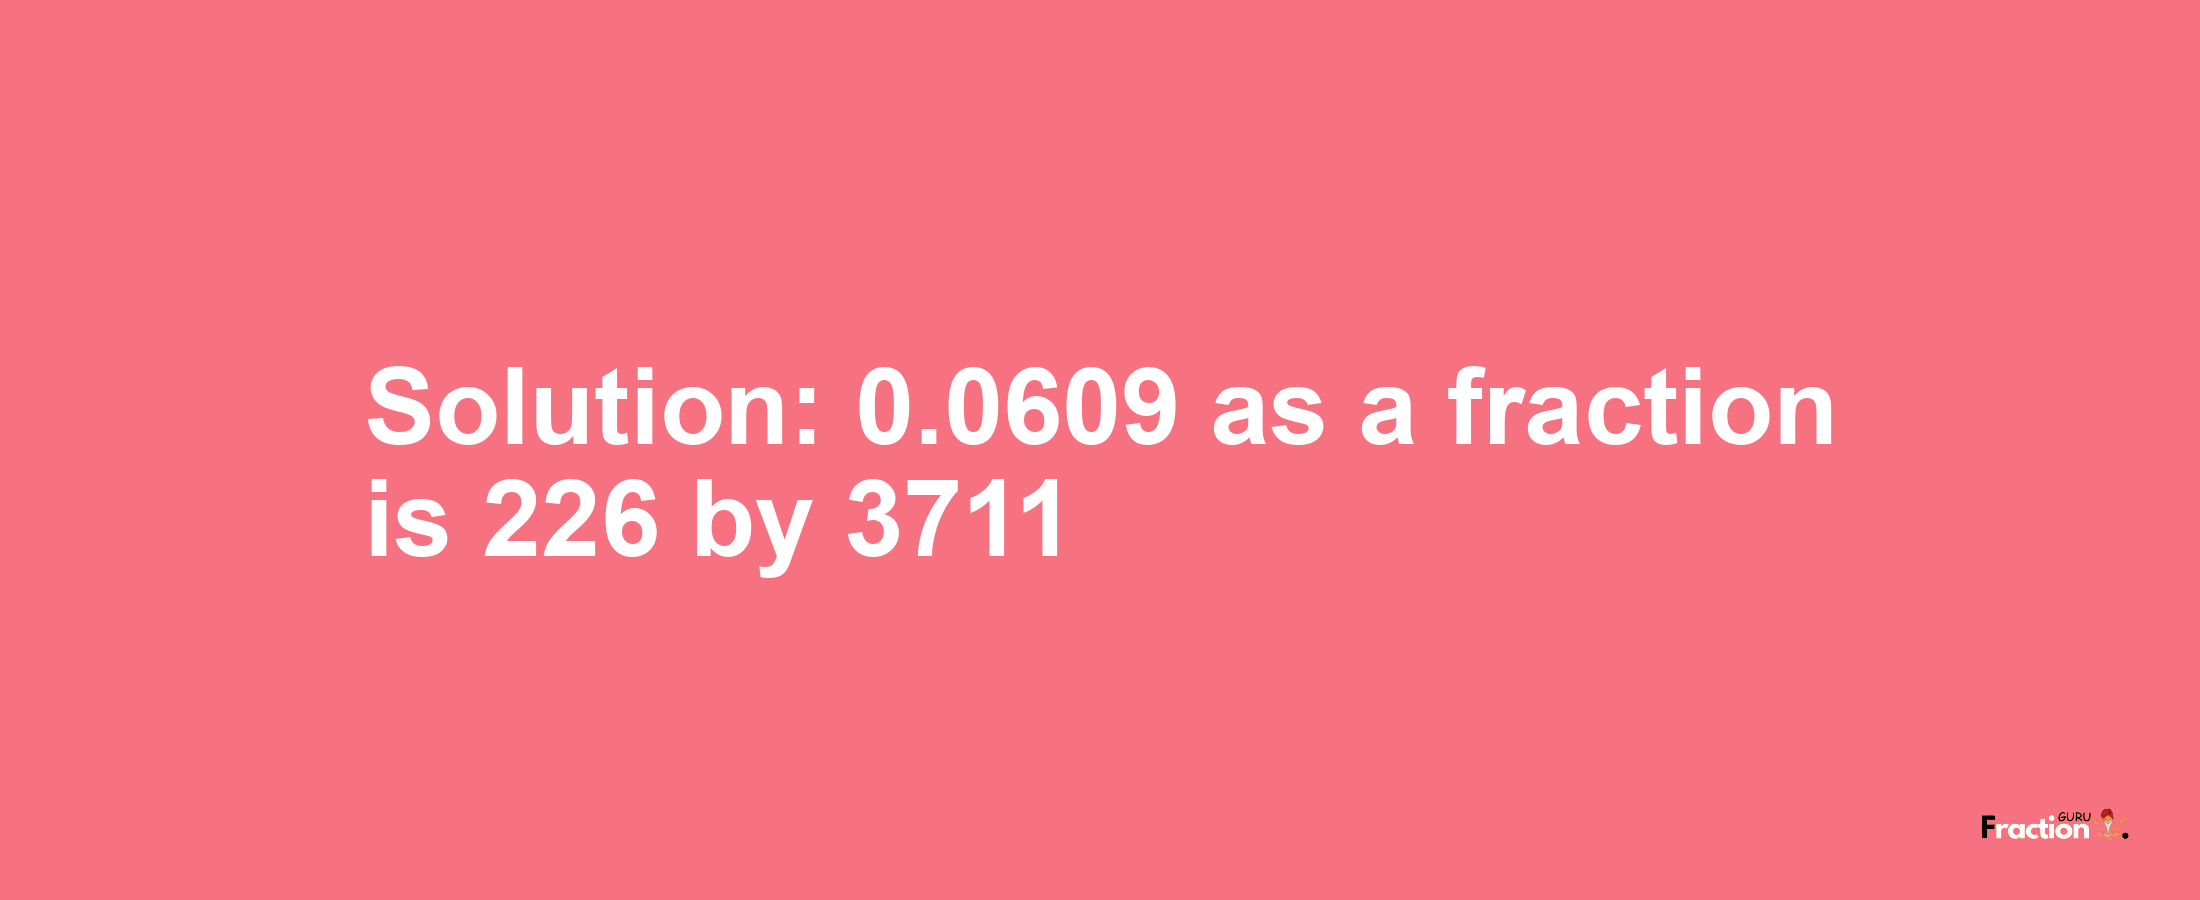 Solution:0.0609 as a fraction is 226/3711